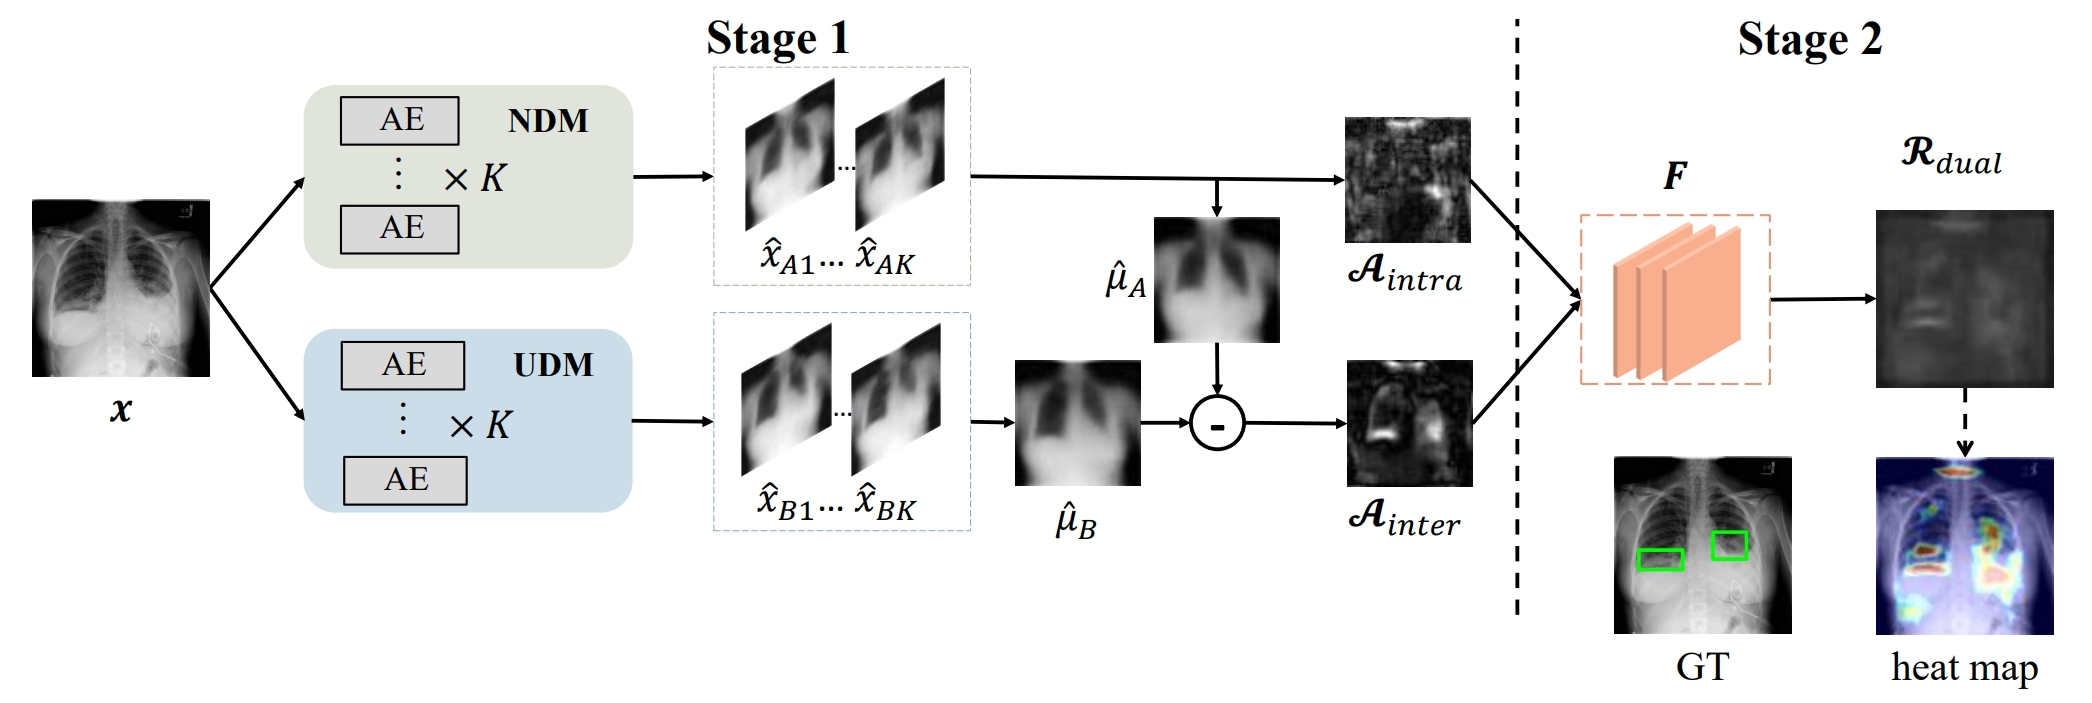 Dual-distribution discrepancy with self-supervised refinement for anomaly detection in medical images